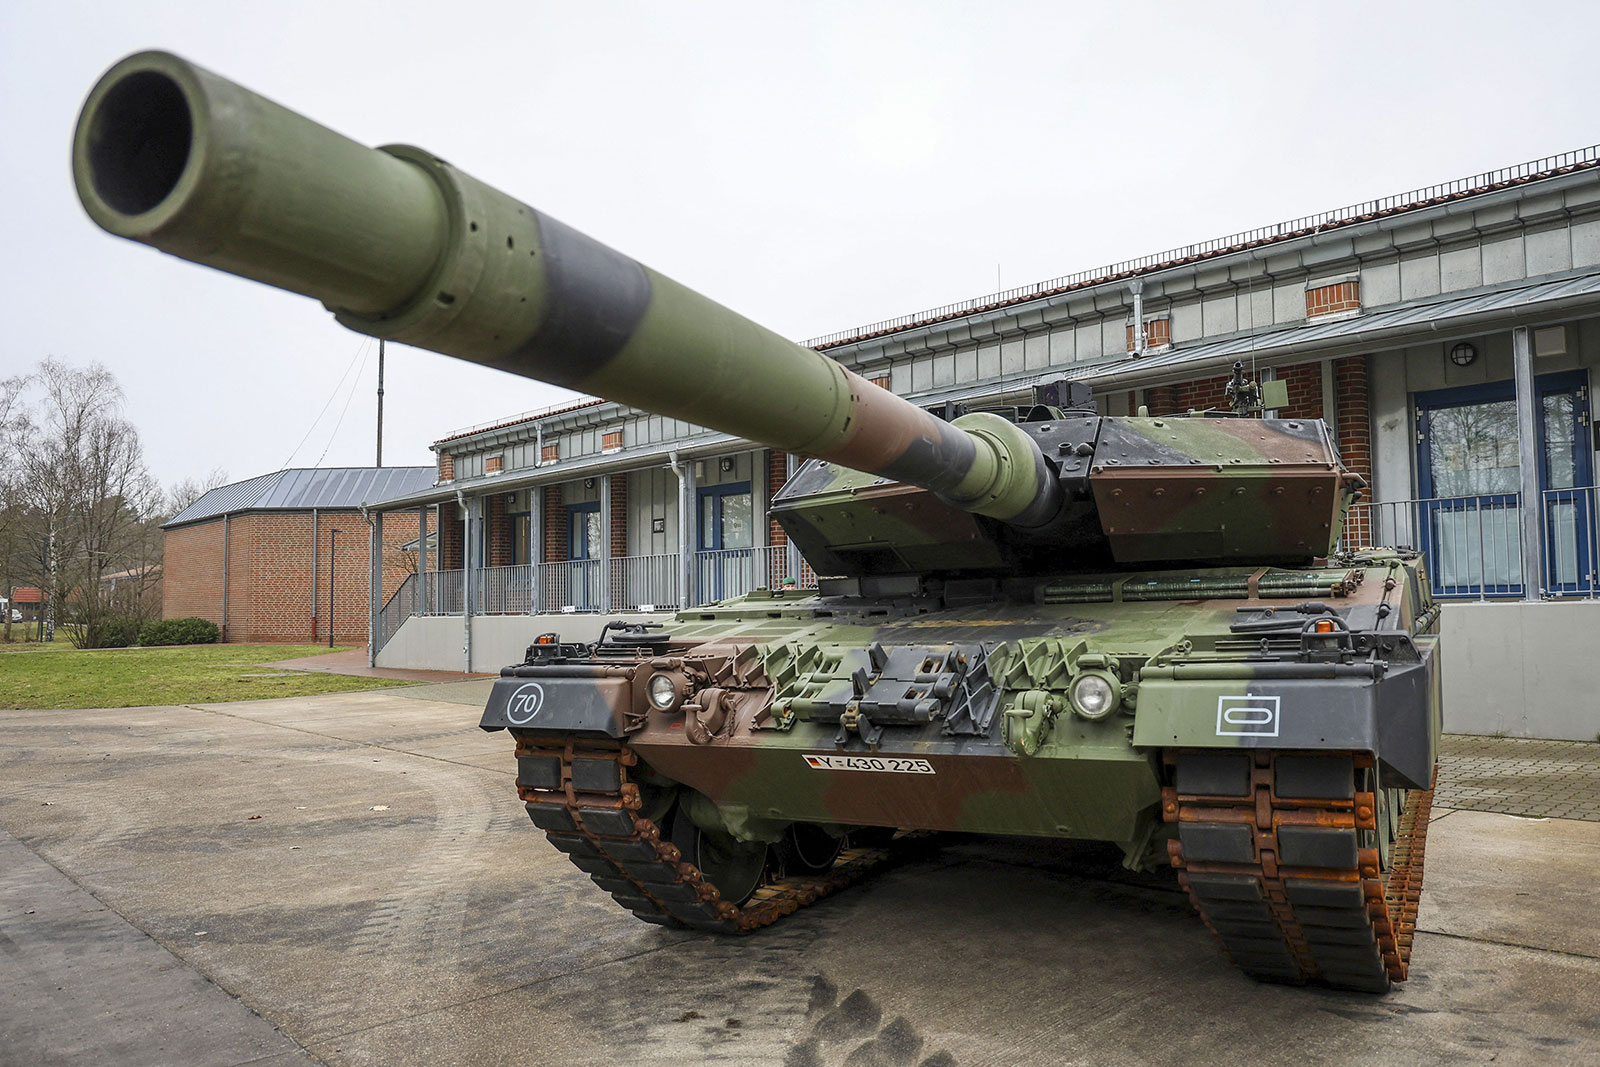 A Leopard 2 tank is seen at the Armored Corps Training Center in Munster, Germany, on February 20.